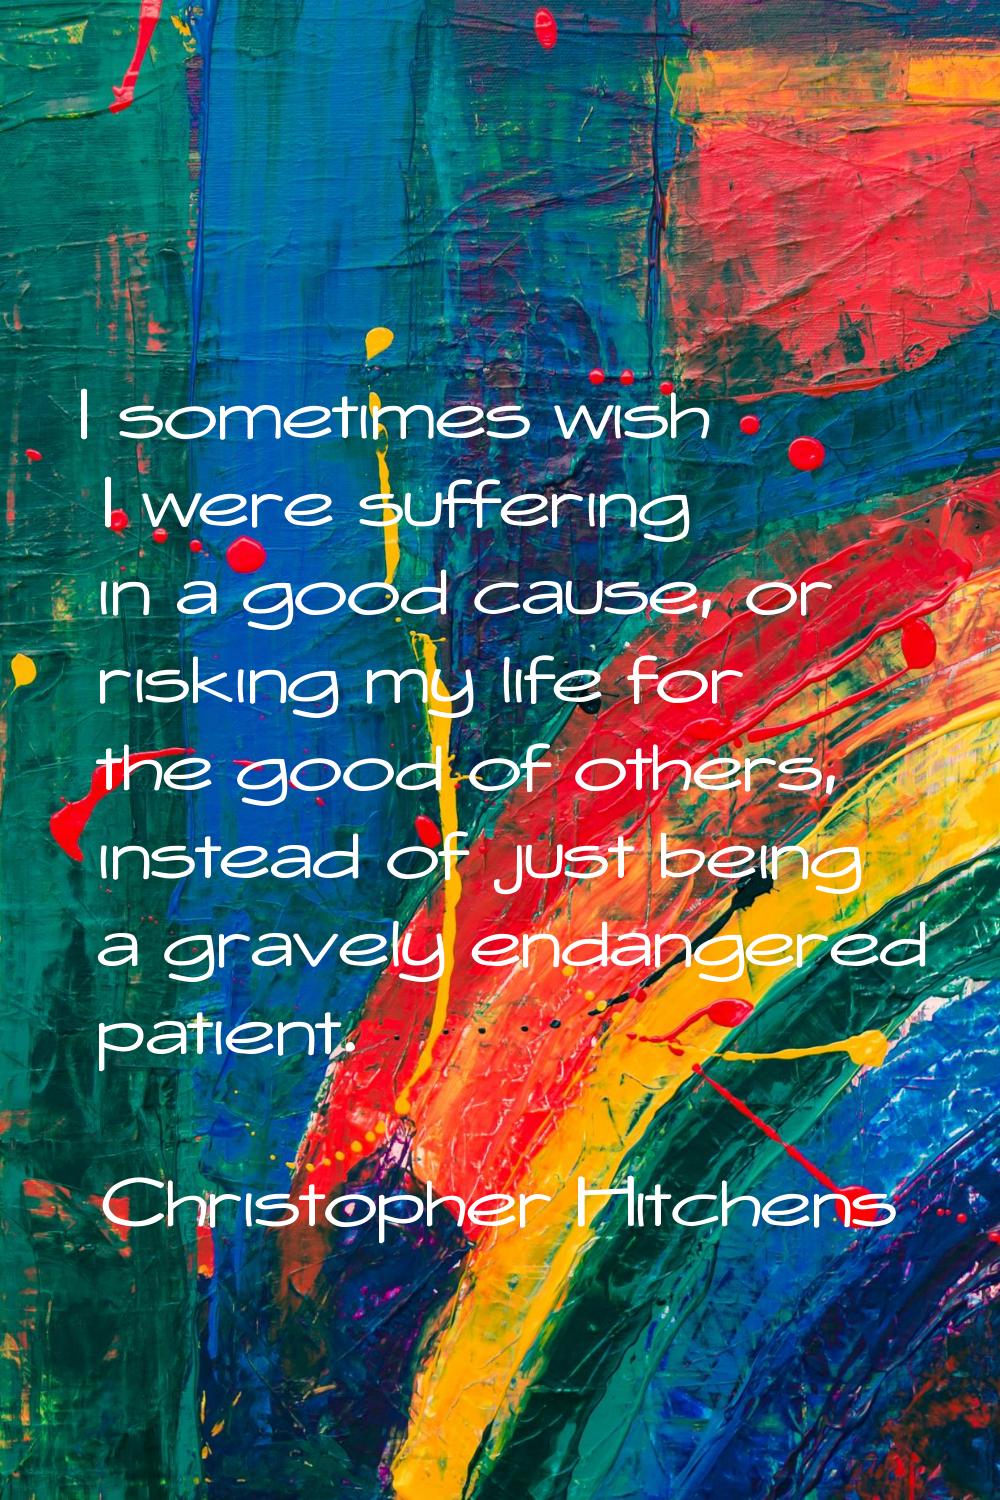 I sometimes wish I were suffering in a good cause, or risking my life for the good of others, inste